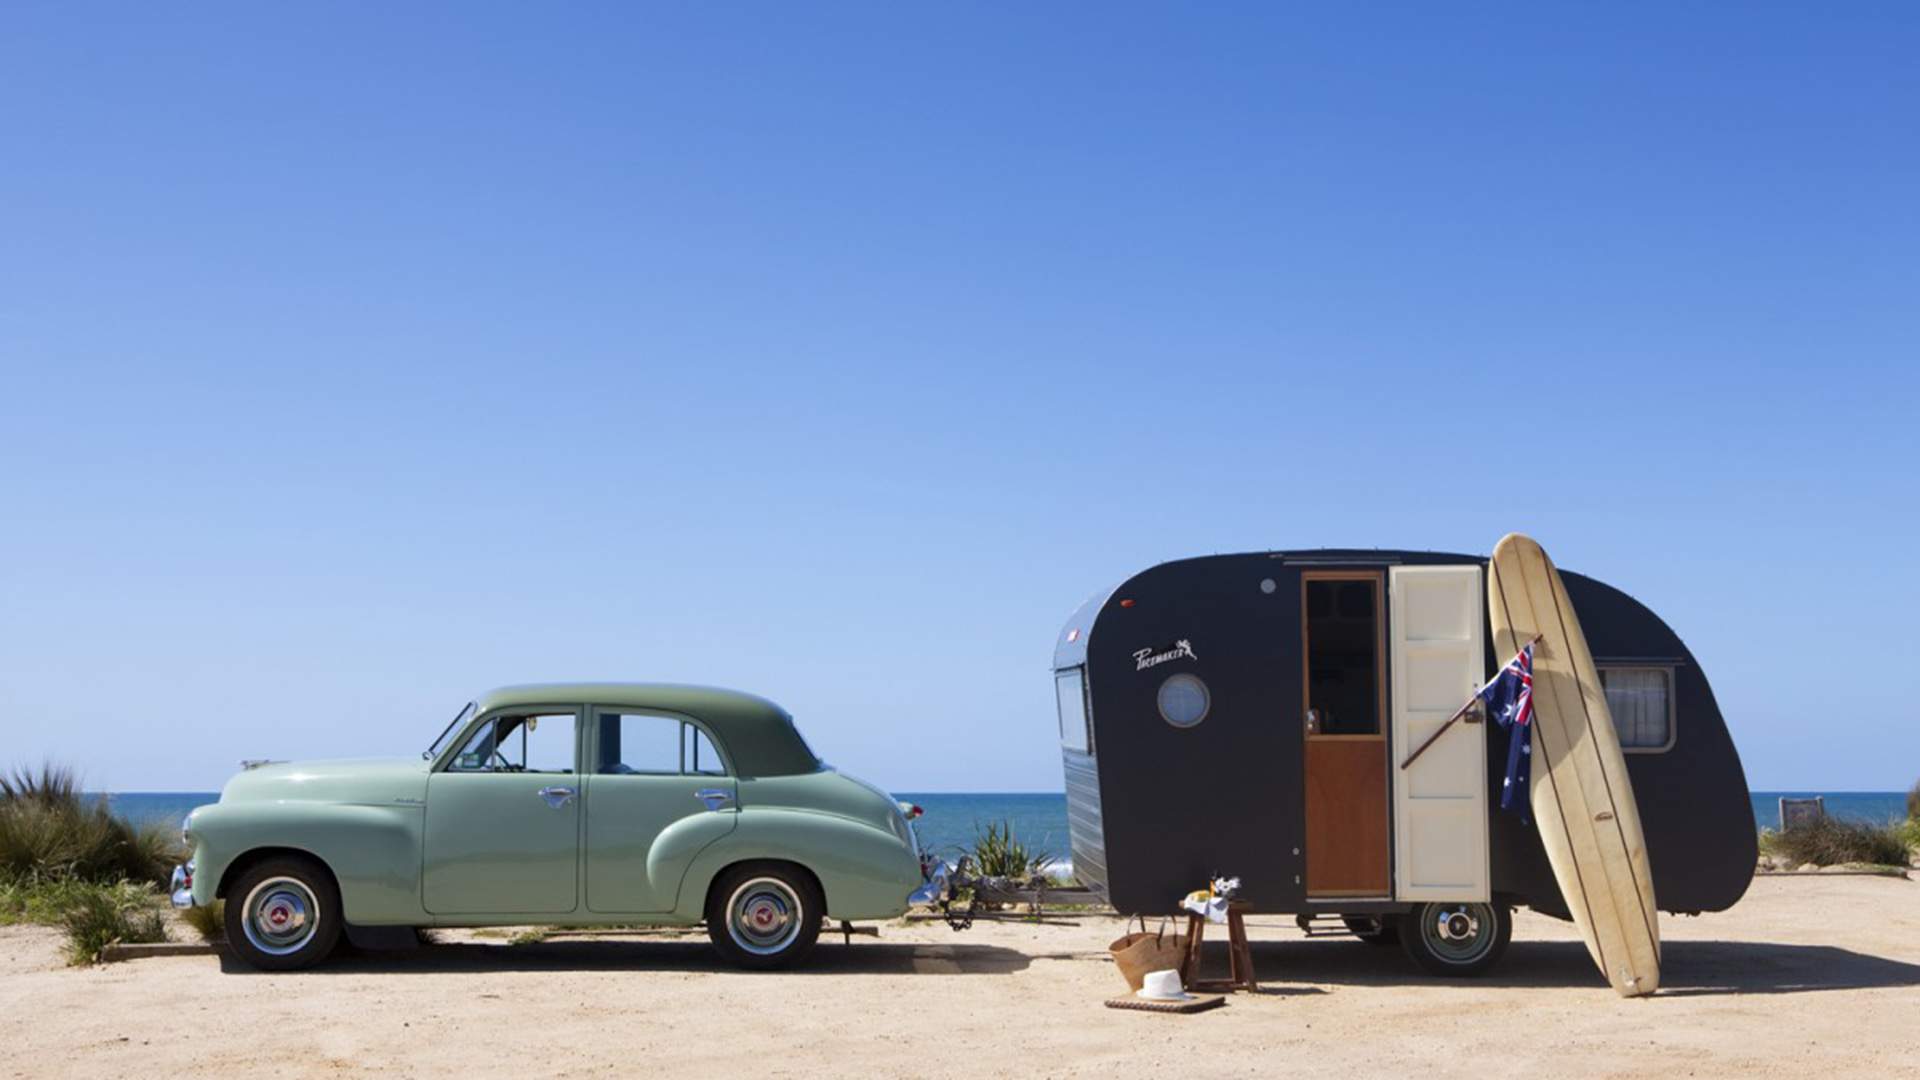 Aussie Platform Camplify Is Like the Airbnb for Campervans